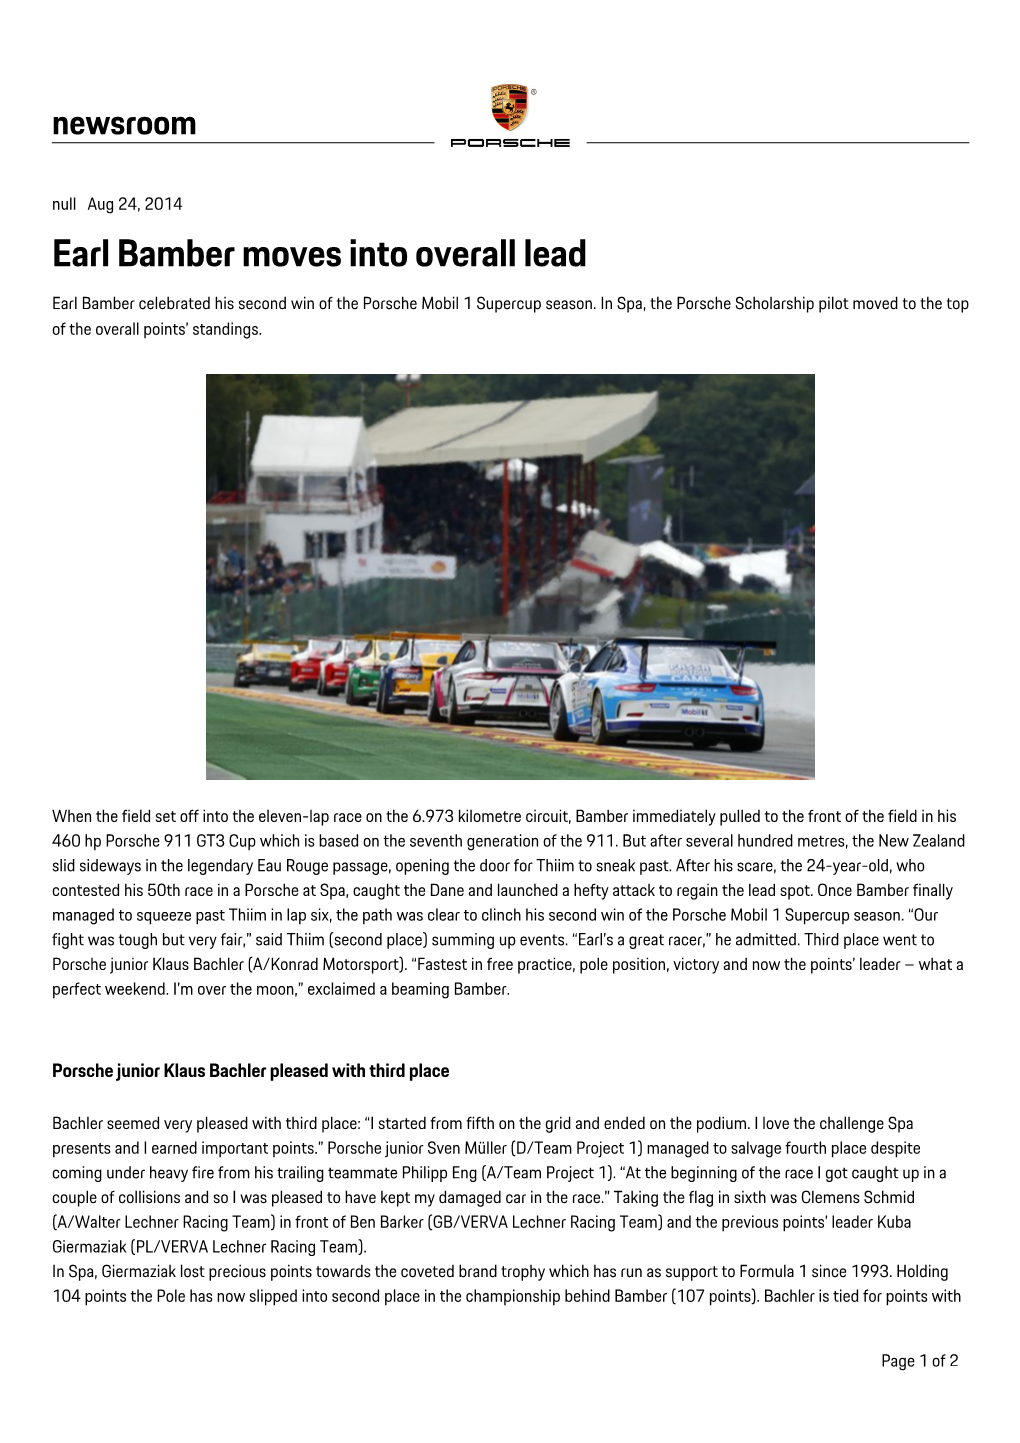 Earl Bamber Moves Into Overall Lead Earl Bamber Celebrated His Second Win of the Porsche Mobil 1 Supercup Season